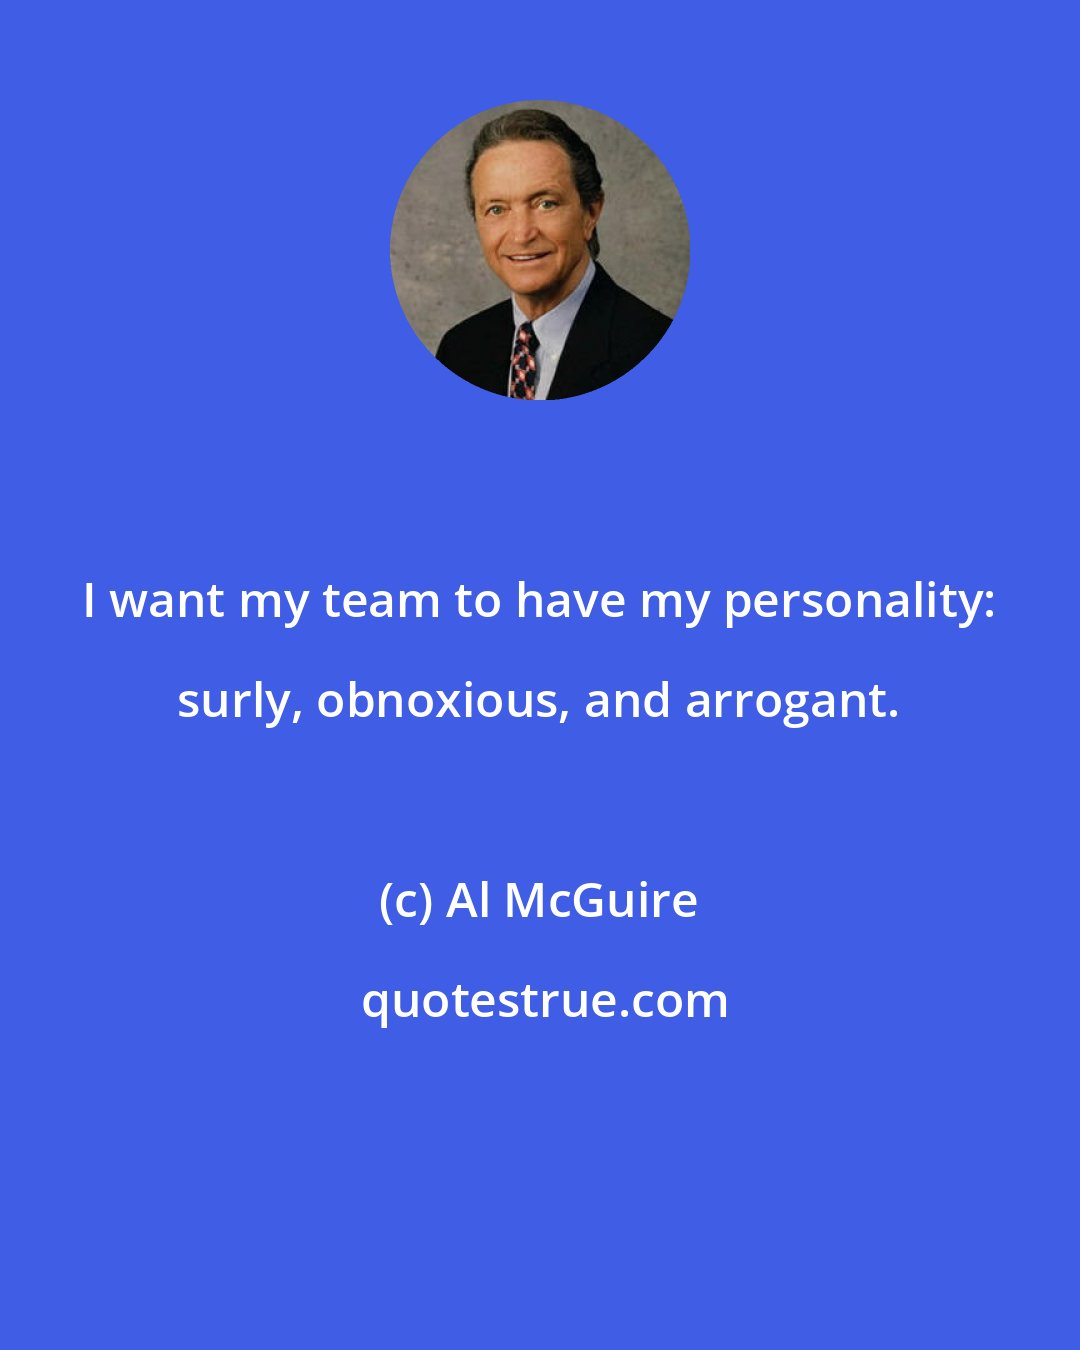 Al McGuire: I want my team to have my personality: surly, obnoxious, and arrogant.